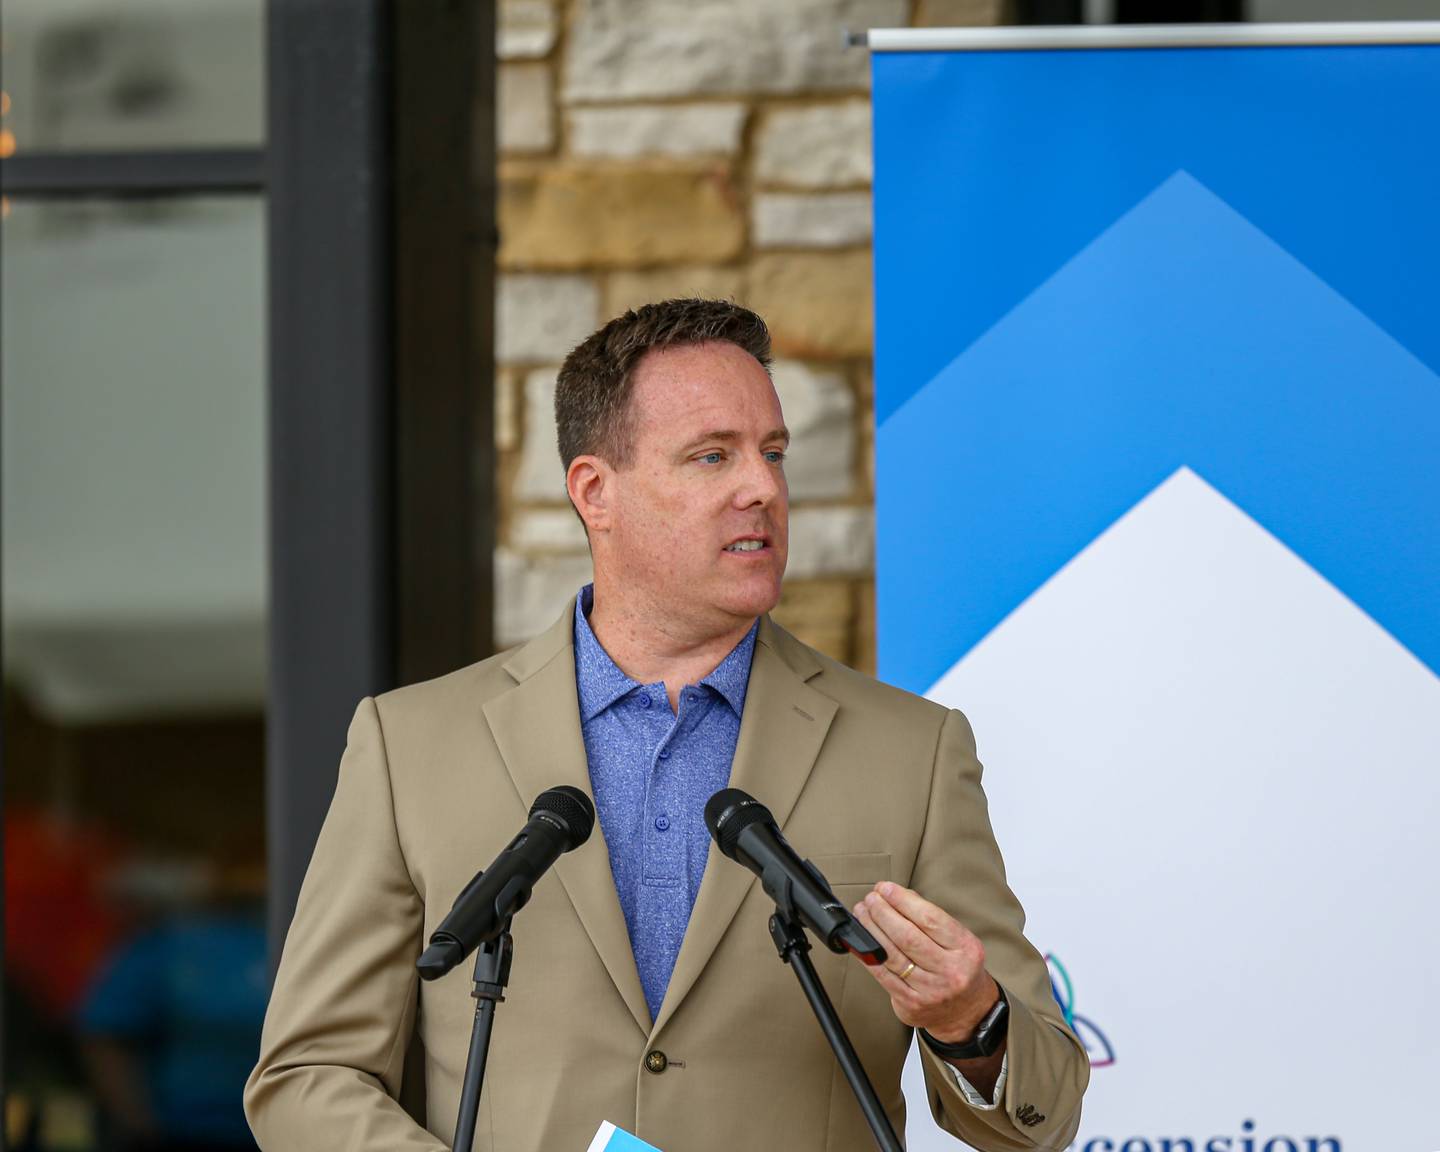 Chris Shride, president of Ascension Saint Joseph Medical Center in Joliet, speaks at the grand opening for a new cancer care center on Sunday, July 17, 2022, at the Ascension Illinois Health Center, 500 S. Weber Road, Romeoville.